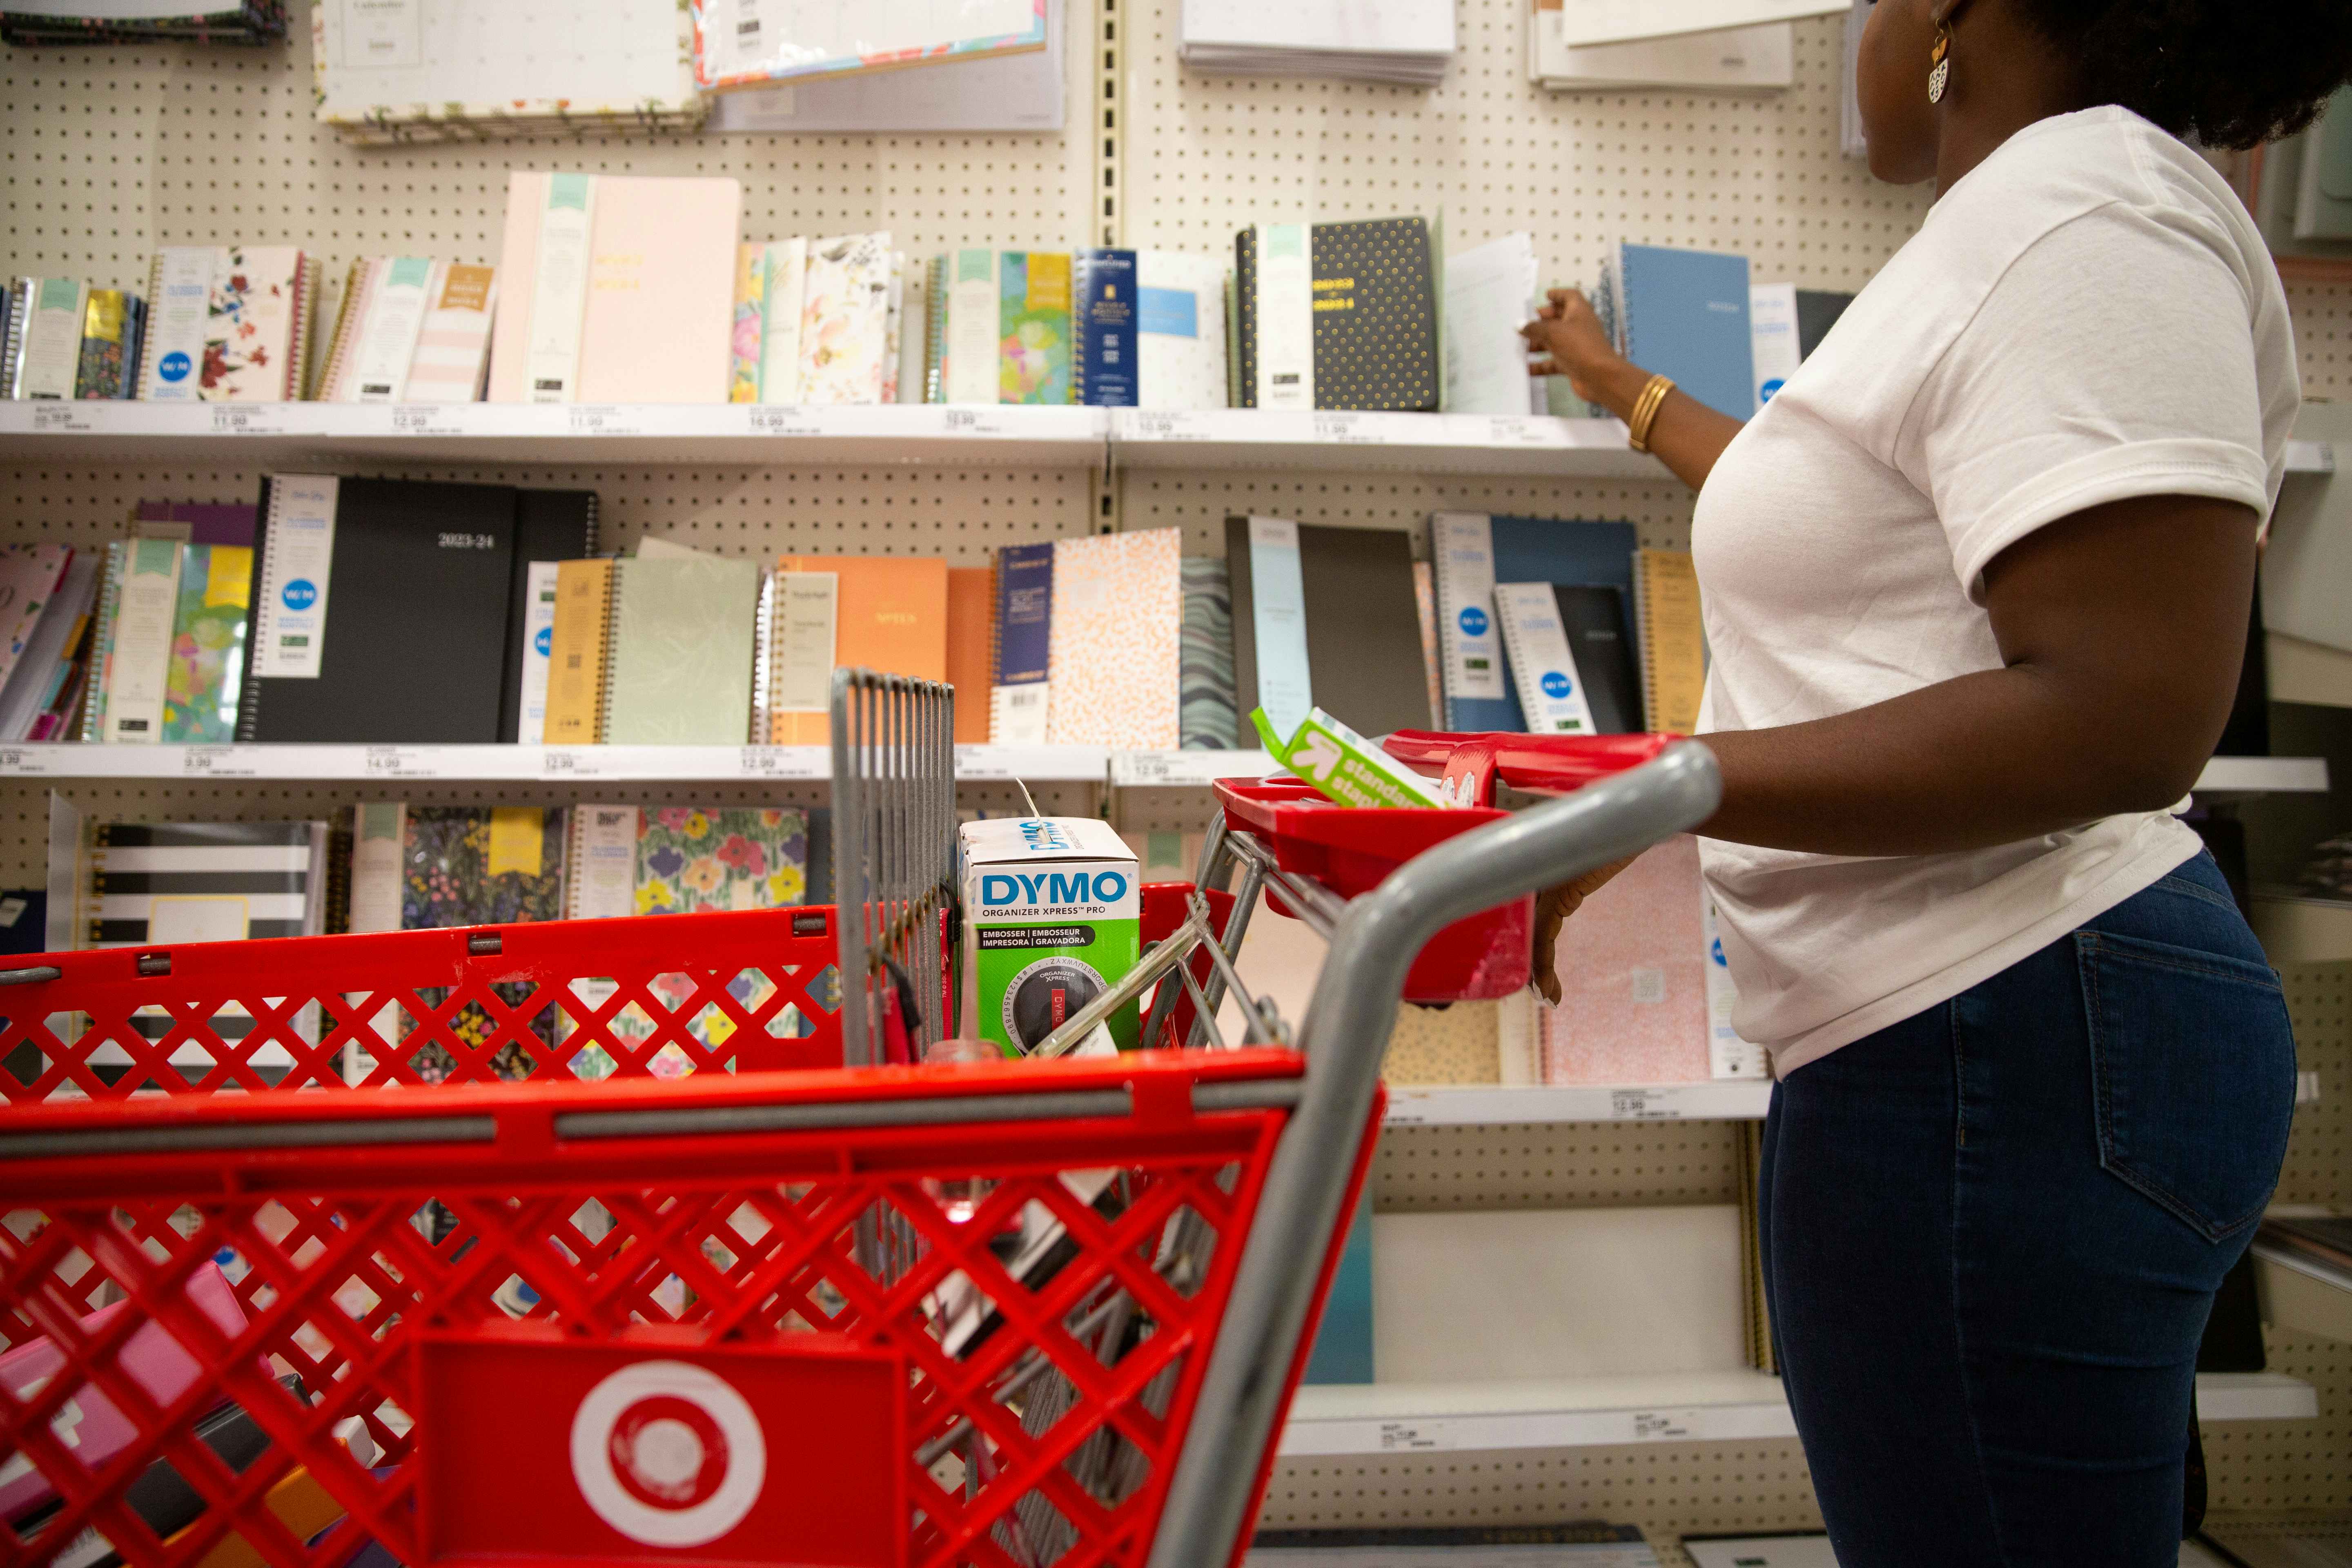 Person in white shirt looking at a row of notebooks for sale at target